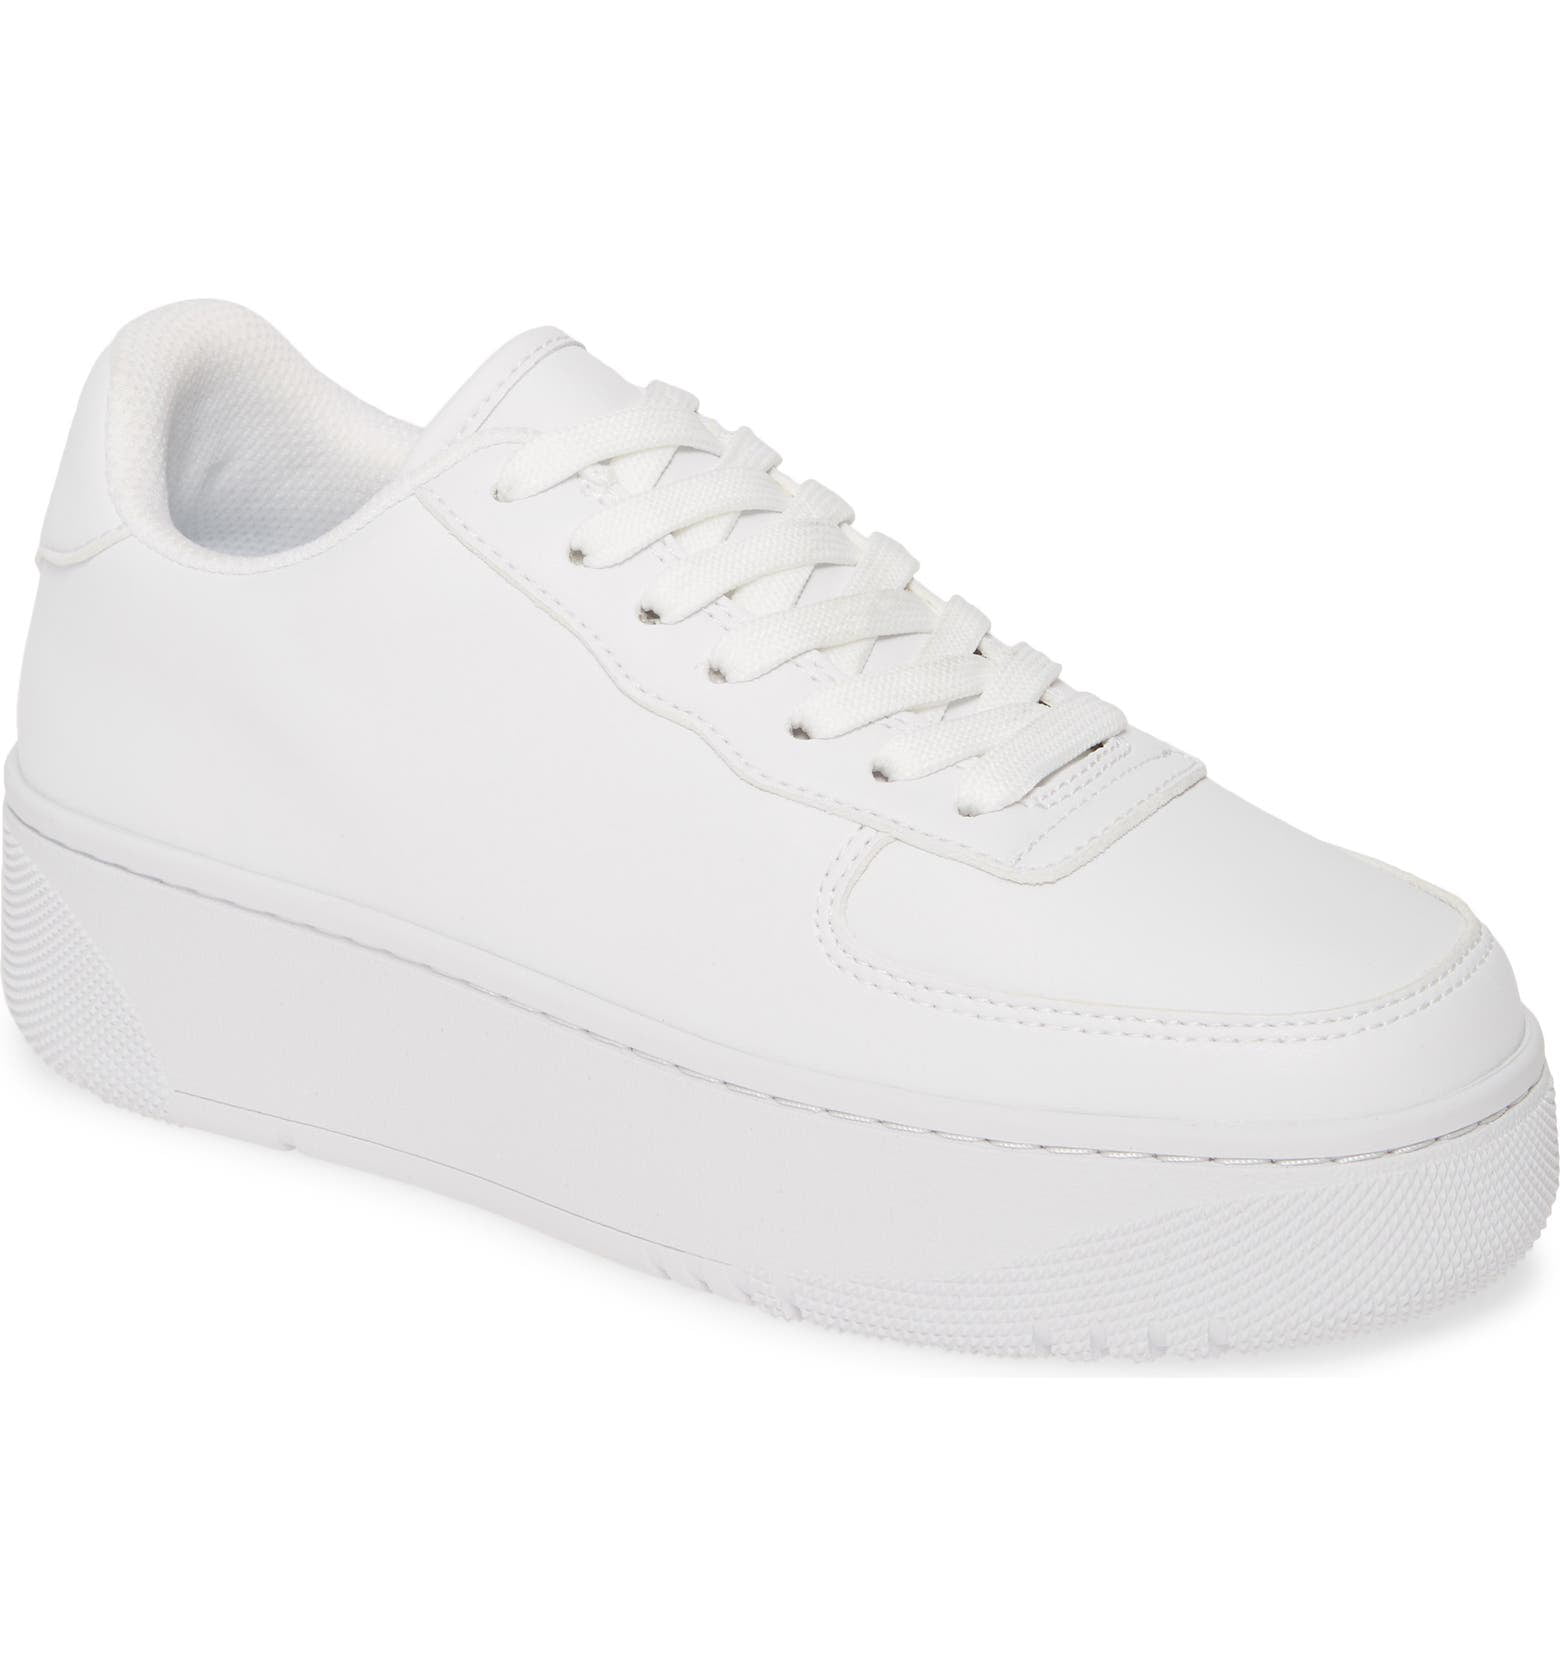 Jeffrey Campbell Fashion Sneakers Lace Up Platfrom Tennis WHITE WHITE) - Walmart.com